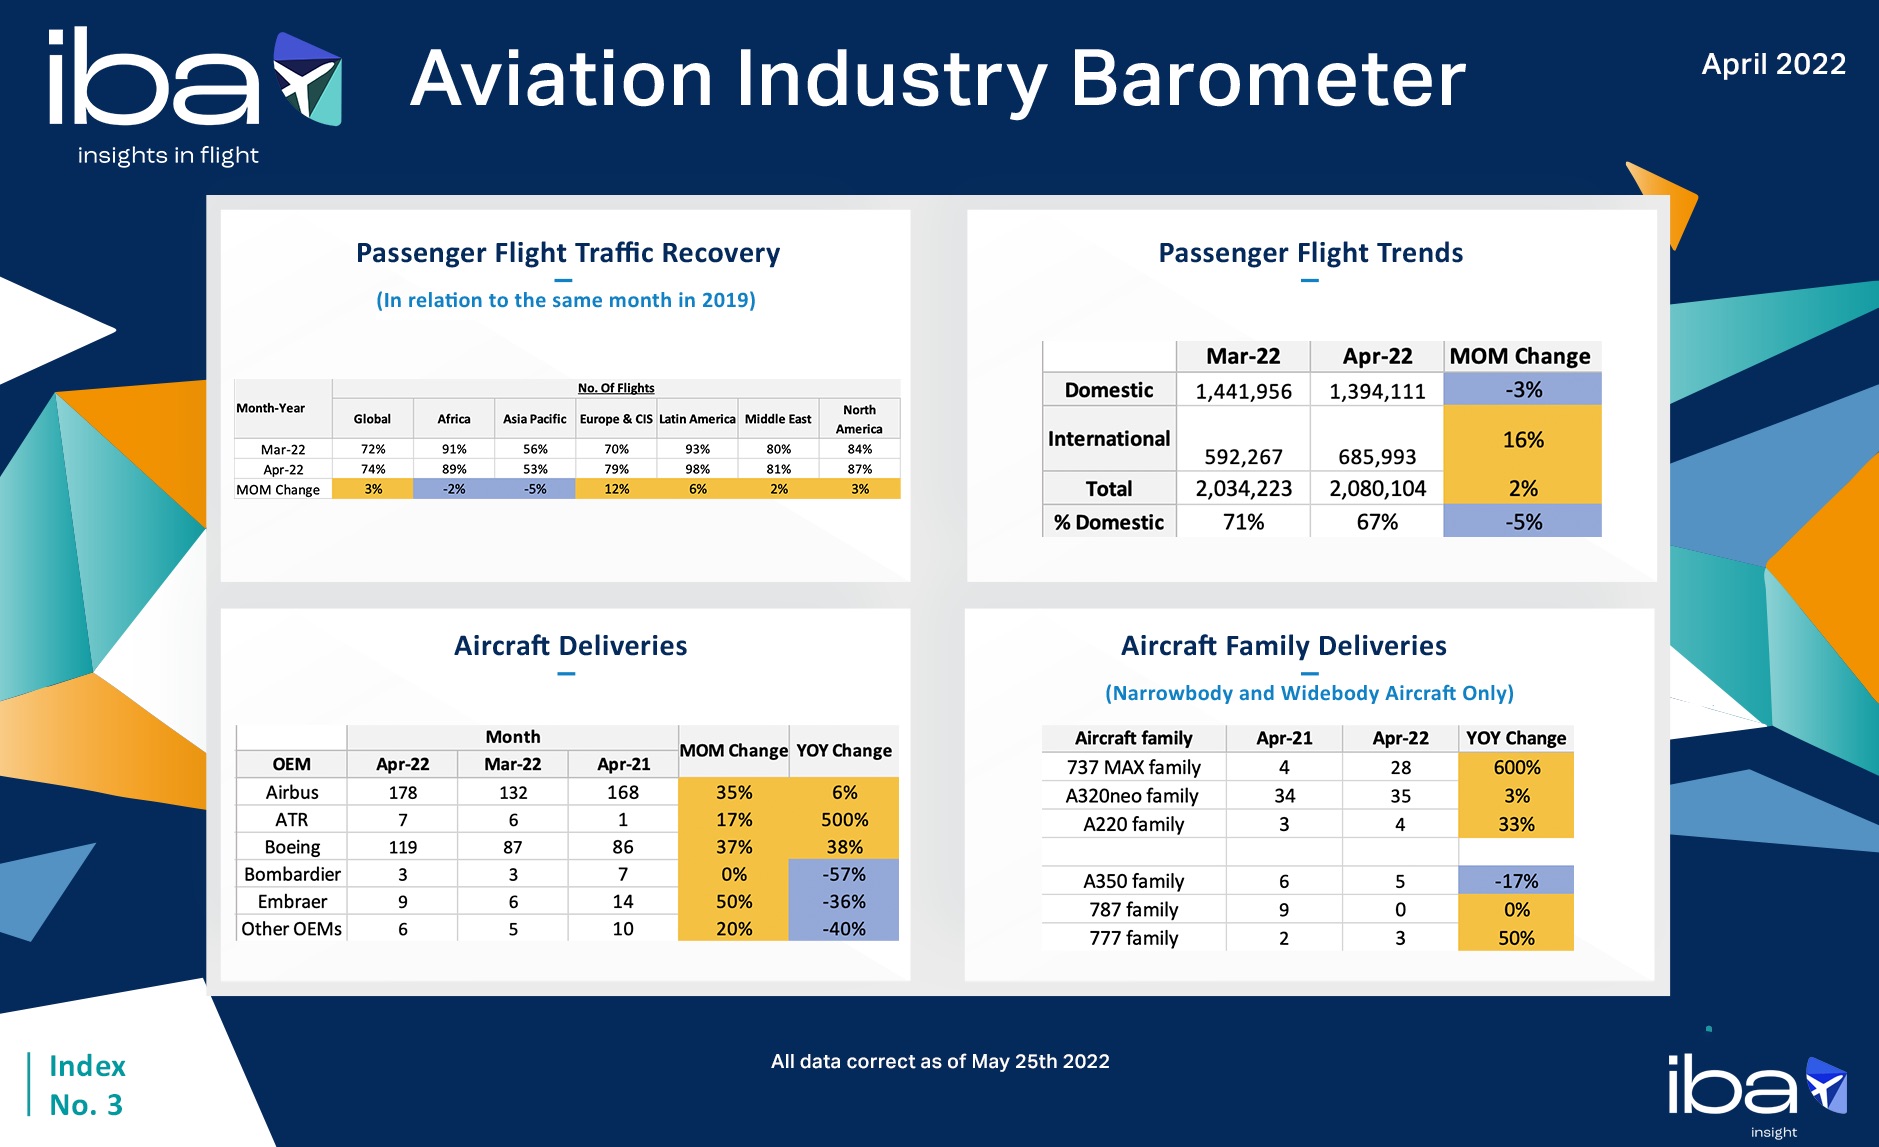 IBA’s aviation industry barometer reveals strong market recovery